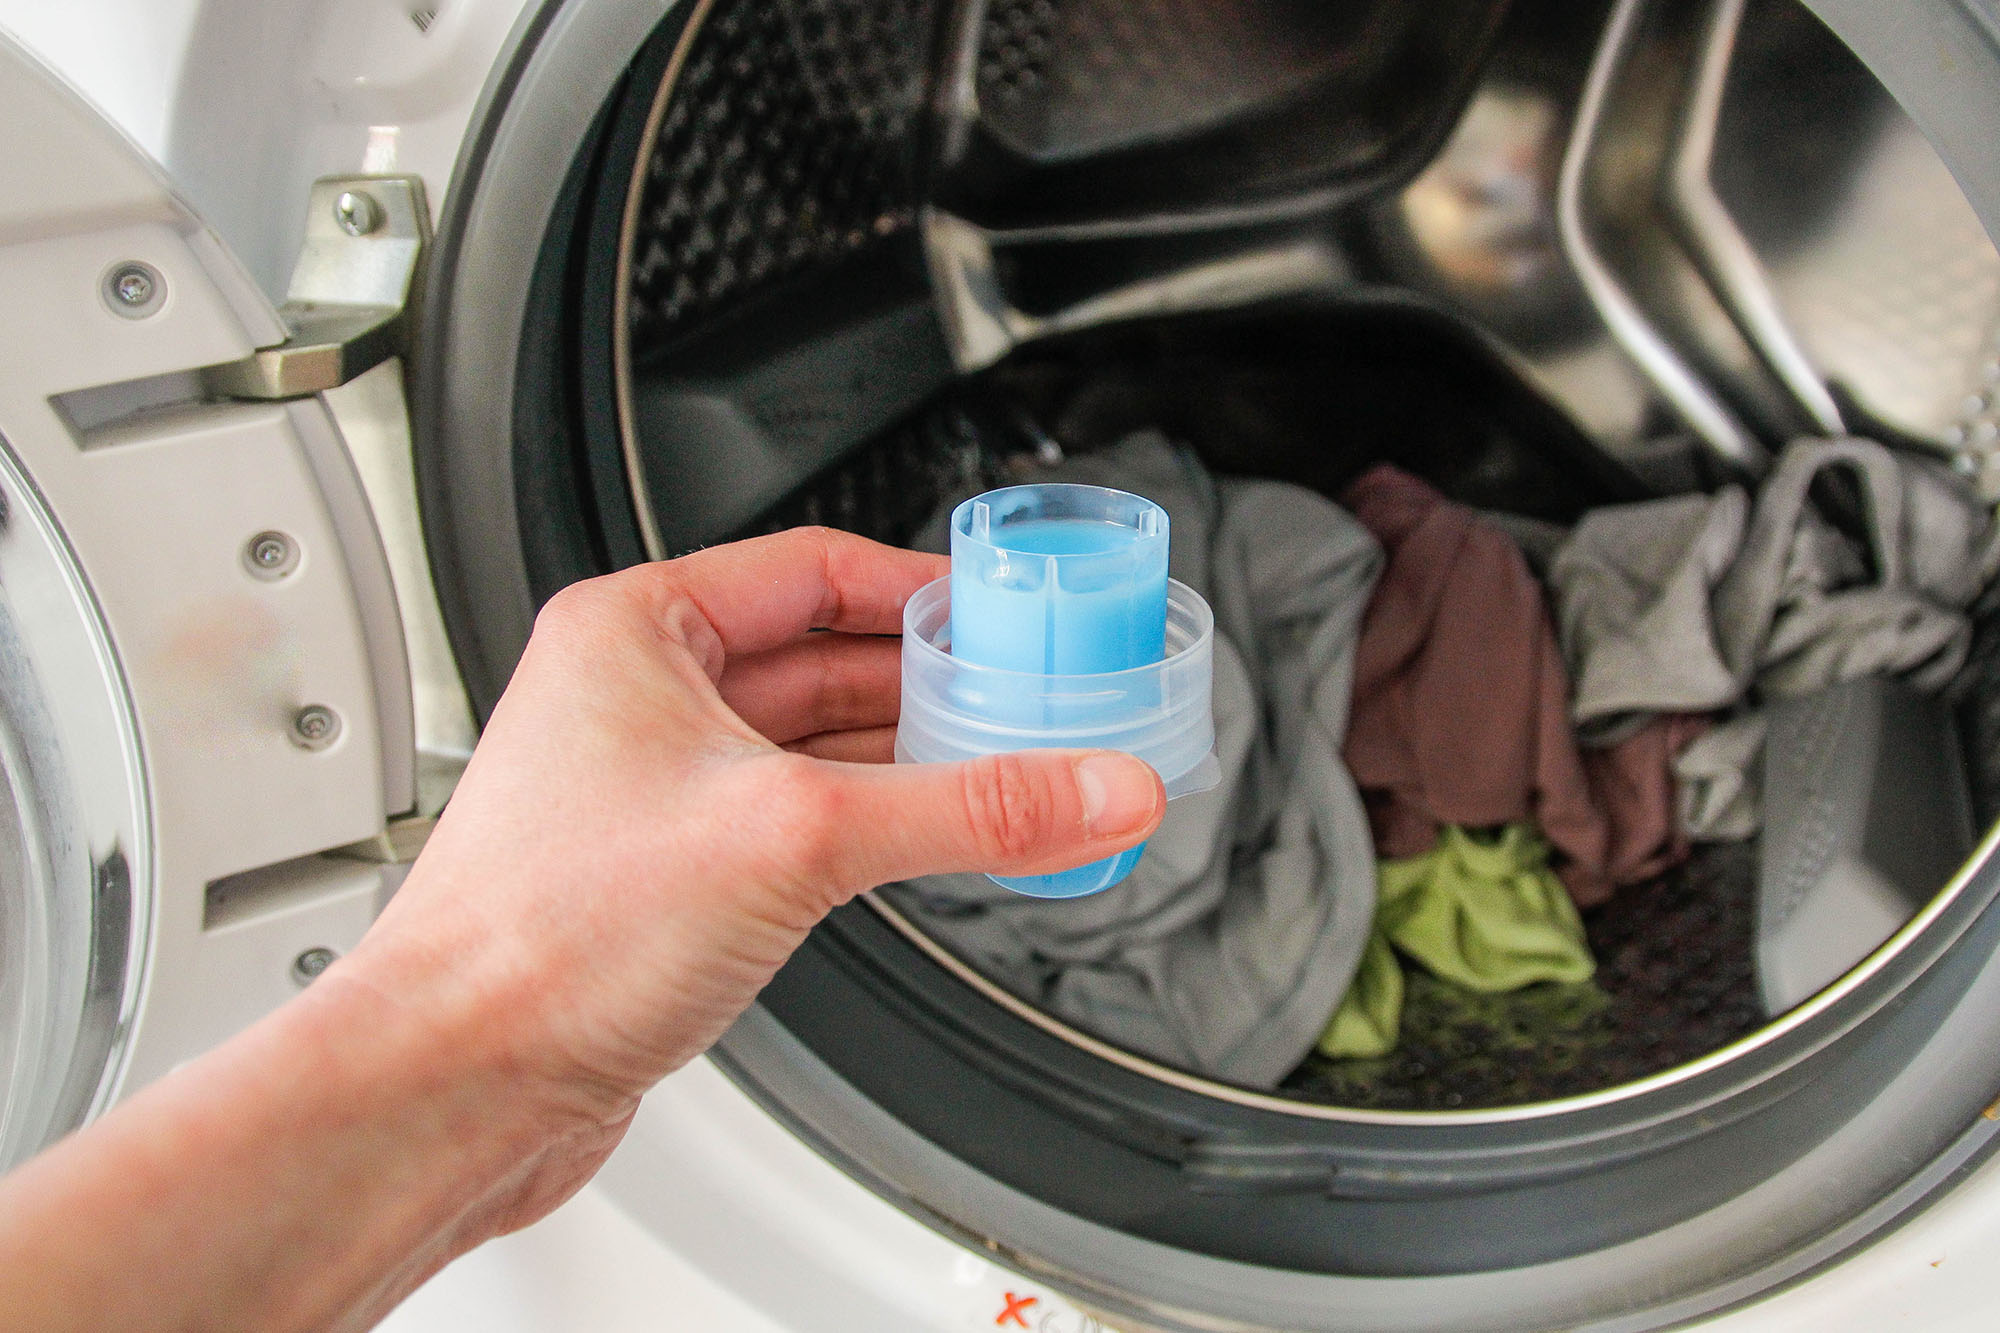 8 Best Laundry Detergents for Sensitive Skin of 2024 - Reviewed